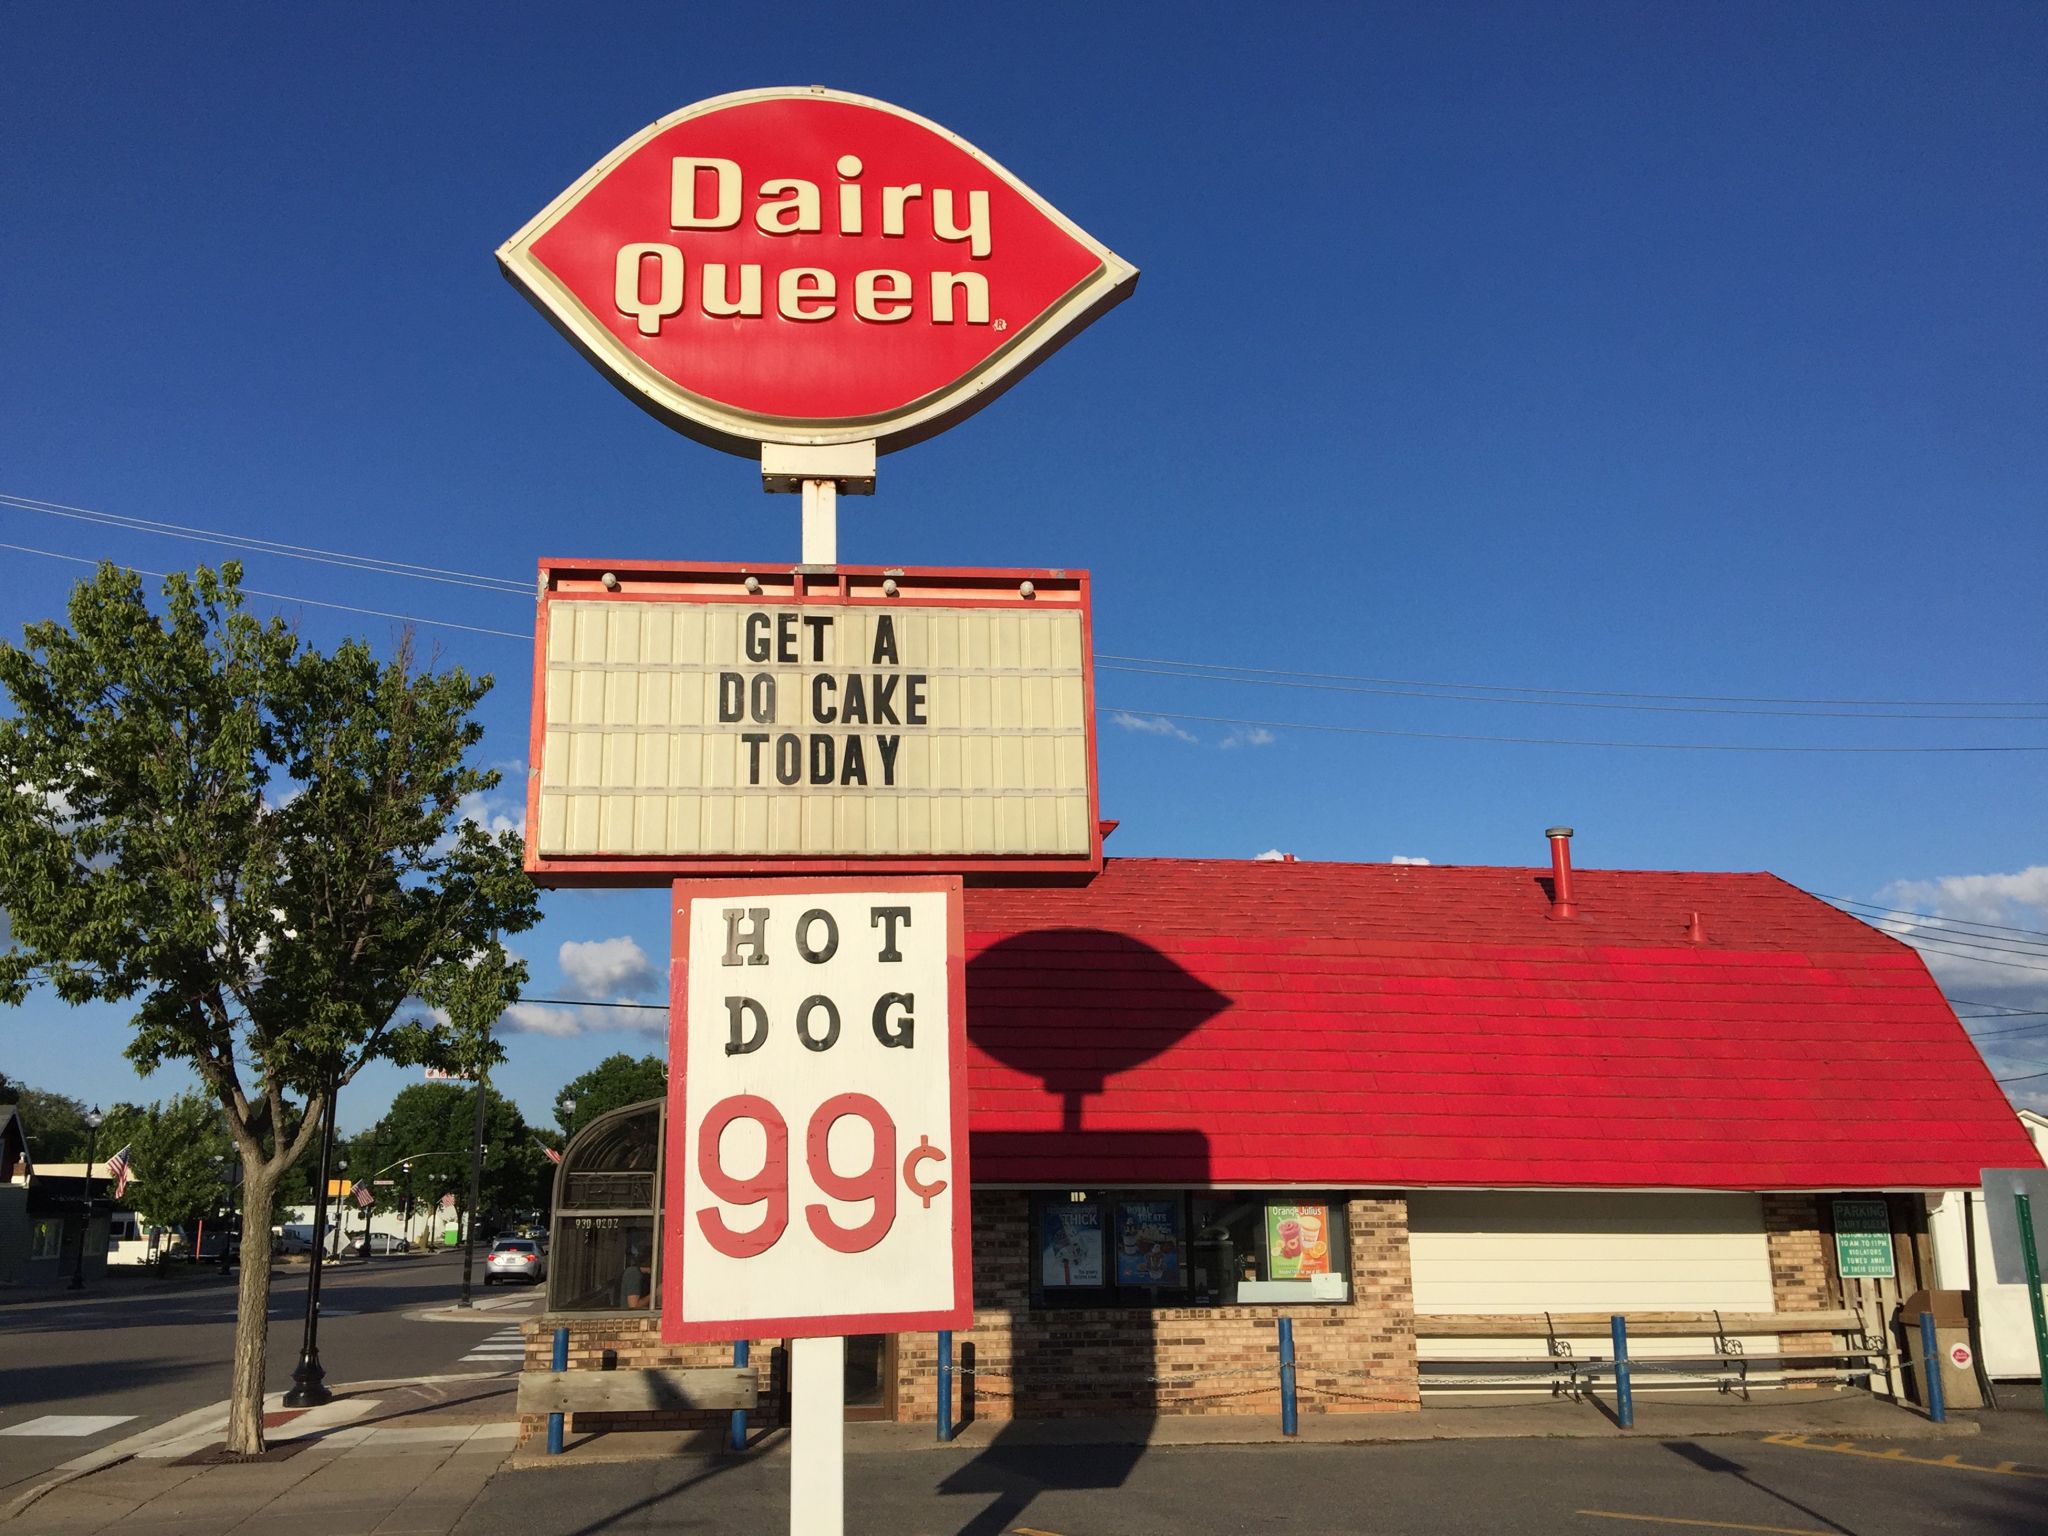 things-you-probably-didn-t-know-about-dairy-queen-texas-favorite-roadside-treat